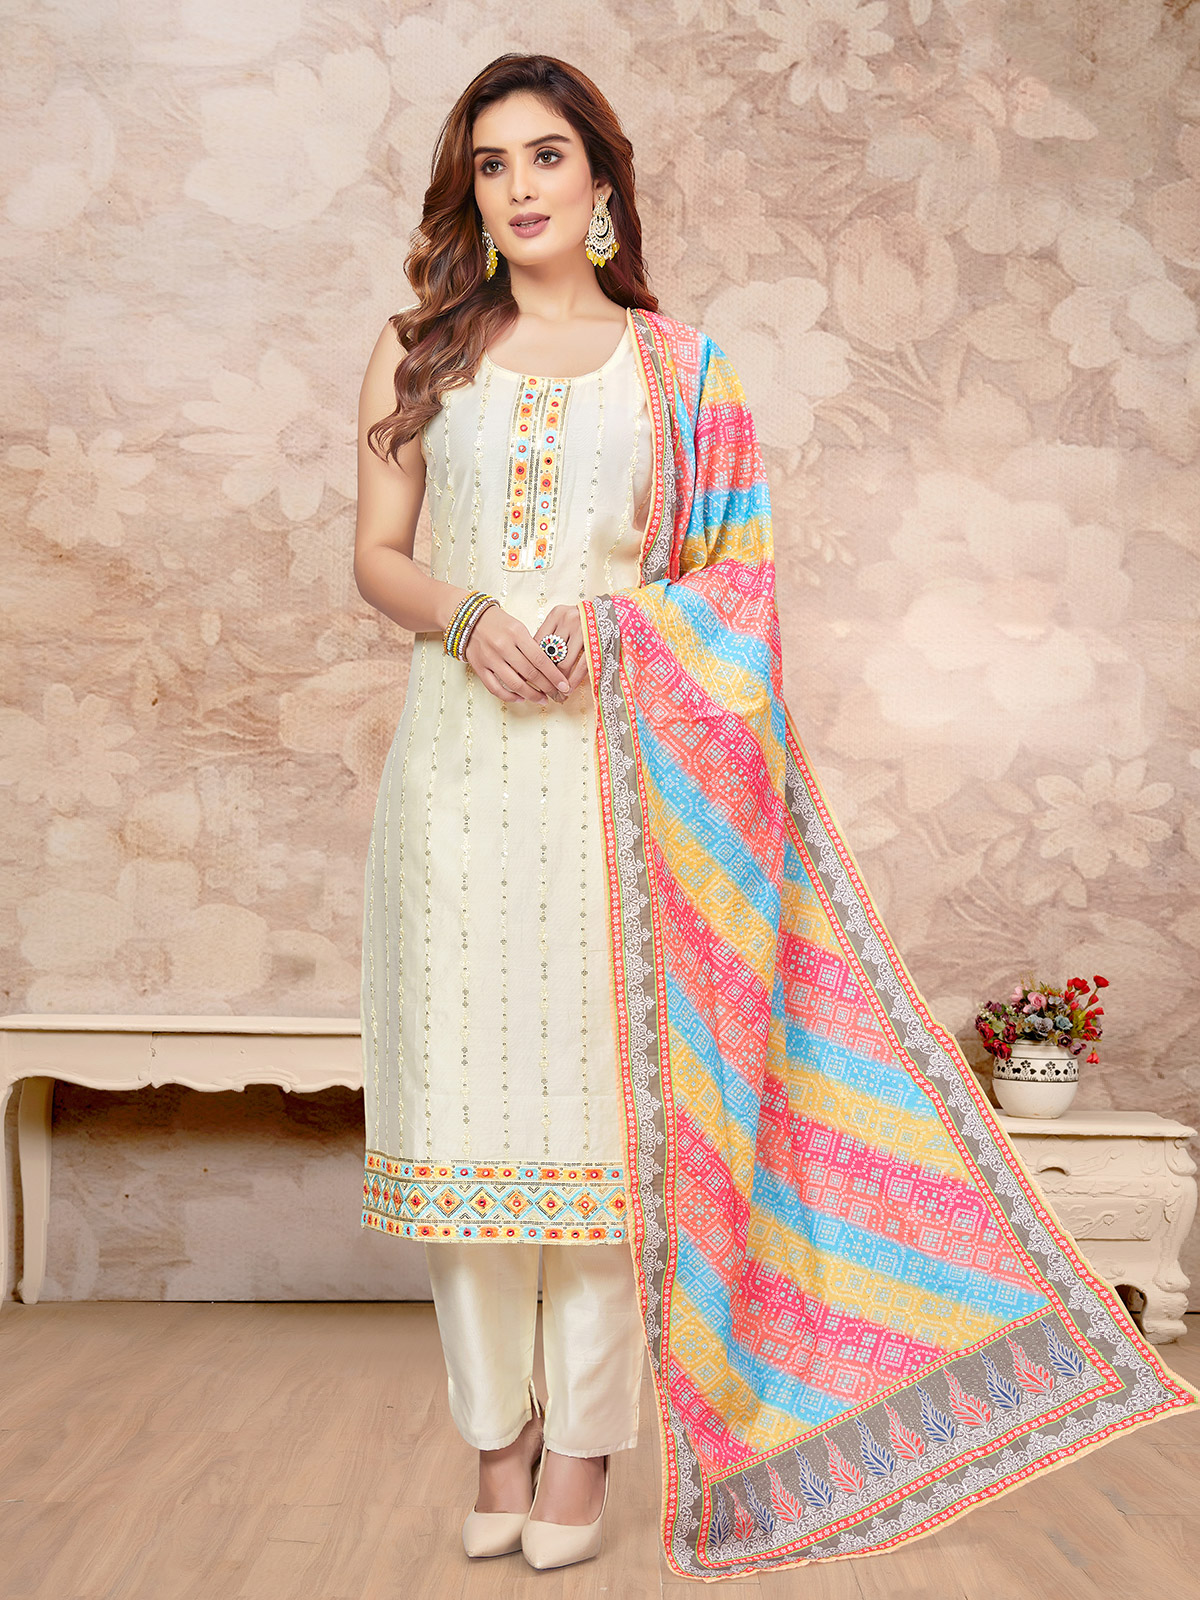 Aggregate more than 245 dupatta for white suit super hot